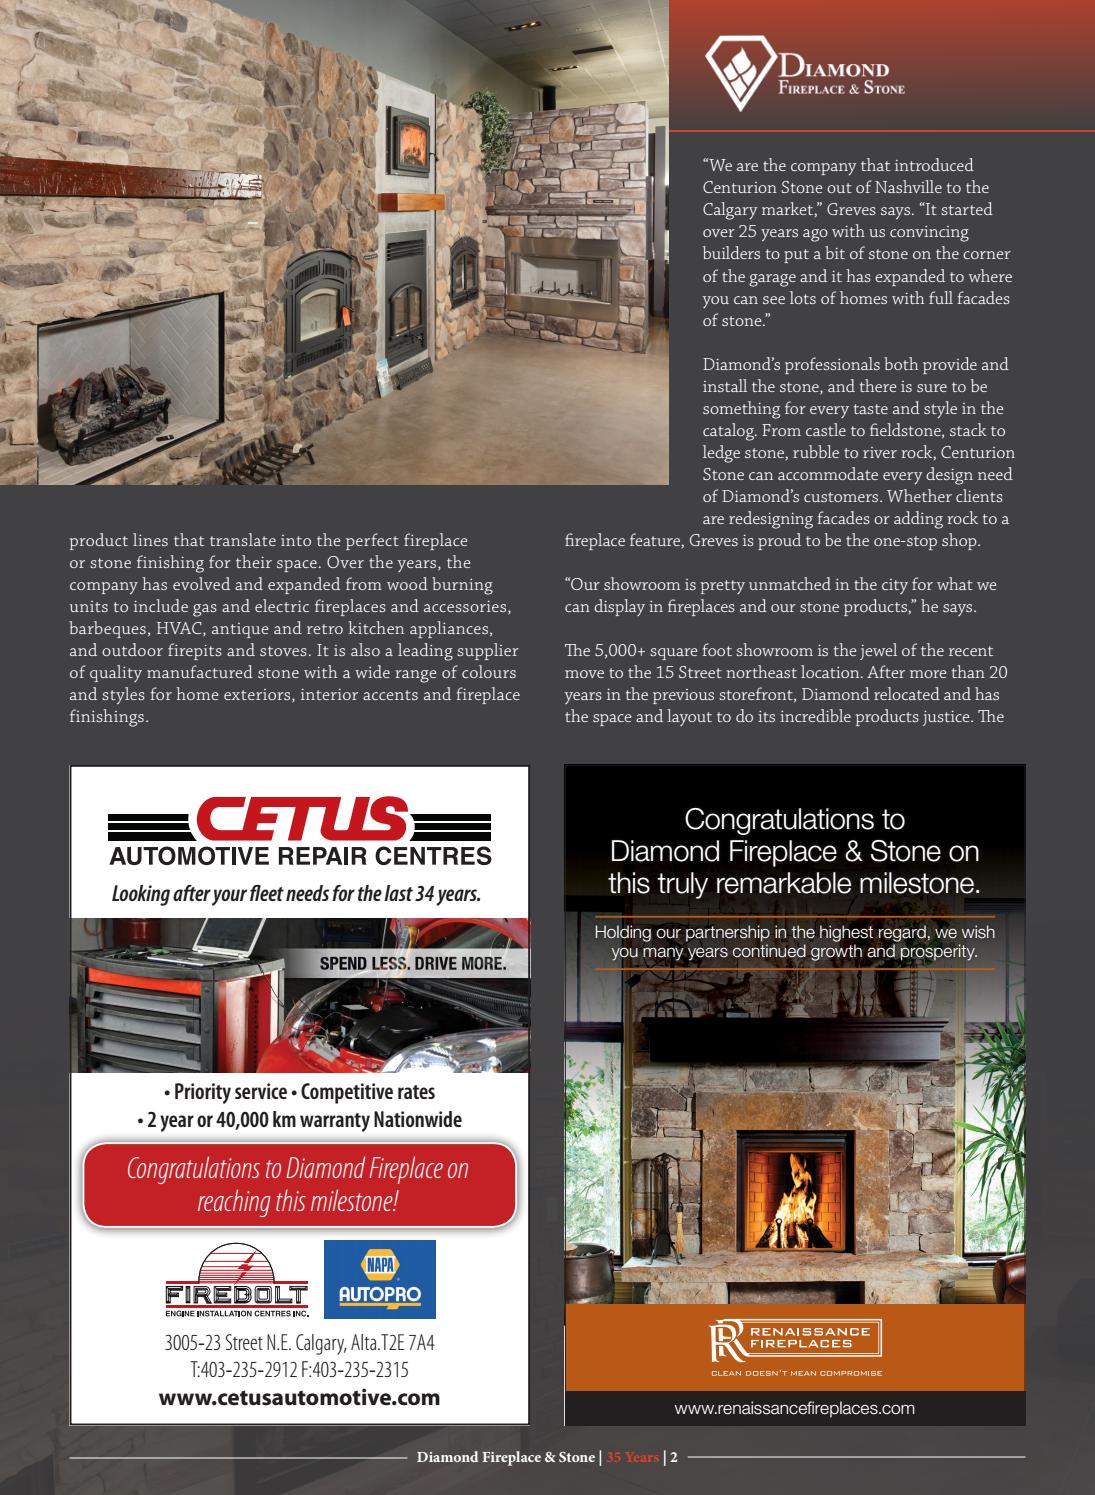 Business in Calgary Magazine - Business Profile for Diamond Fireplace